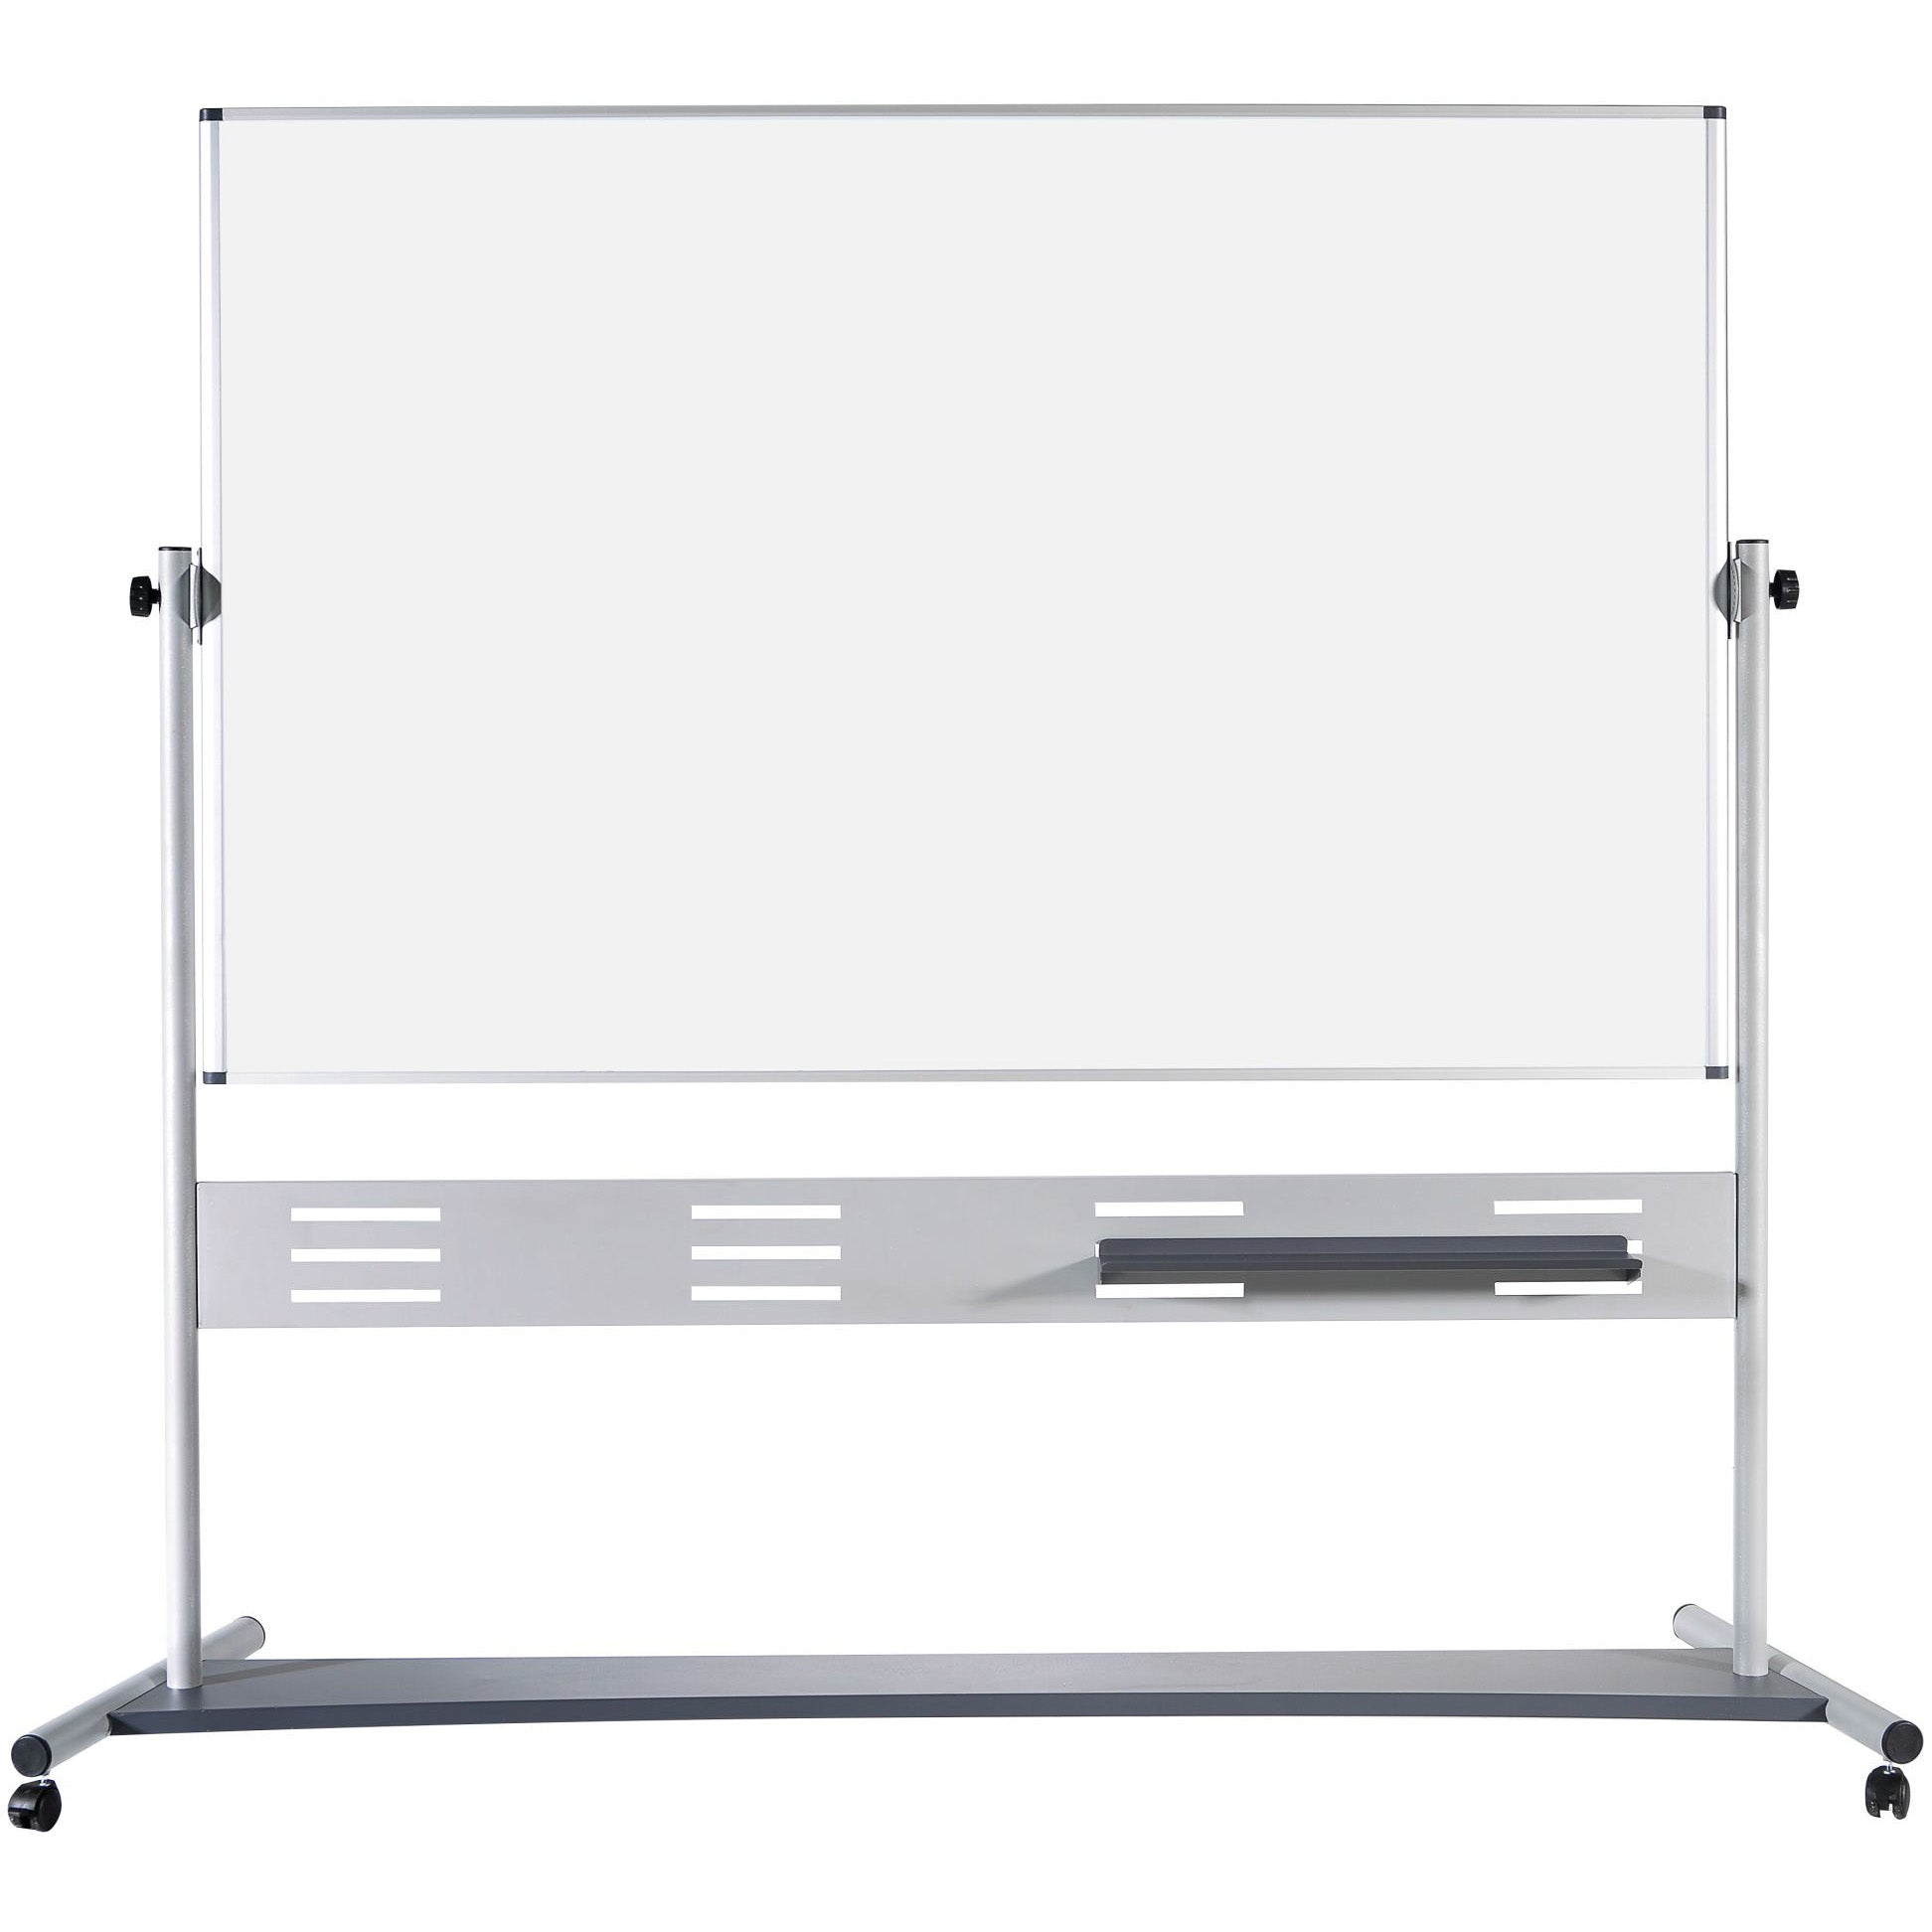 QR5203 Reversible Double Sided Magnetic Dry Erase Mobile White Board Easel with Repositional Marker Tray and Locking Wheels, 36" x 48" by MasterVision